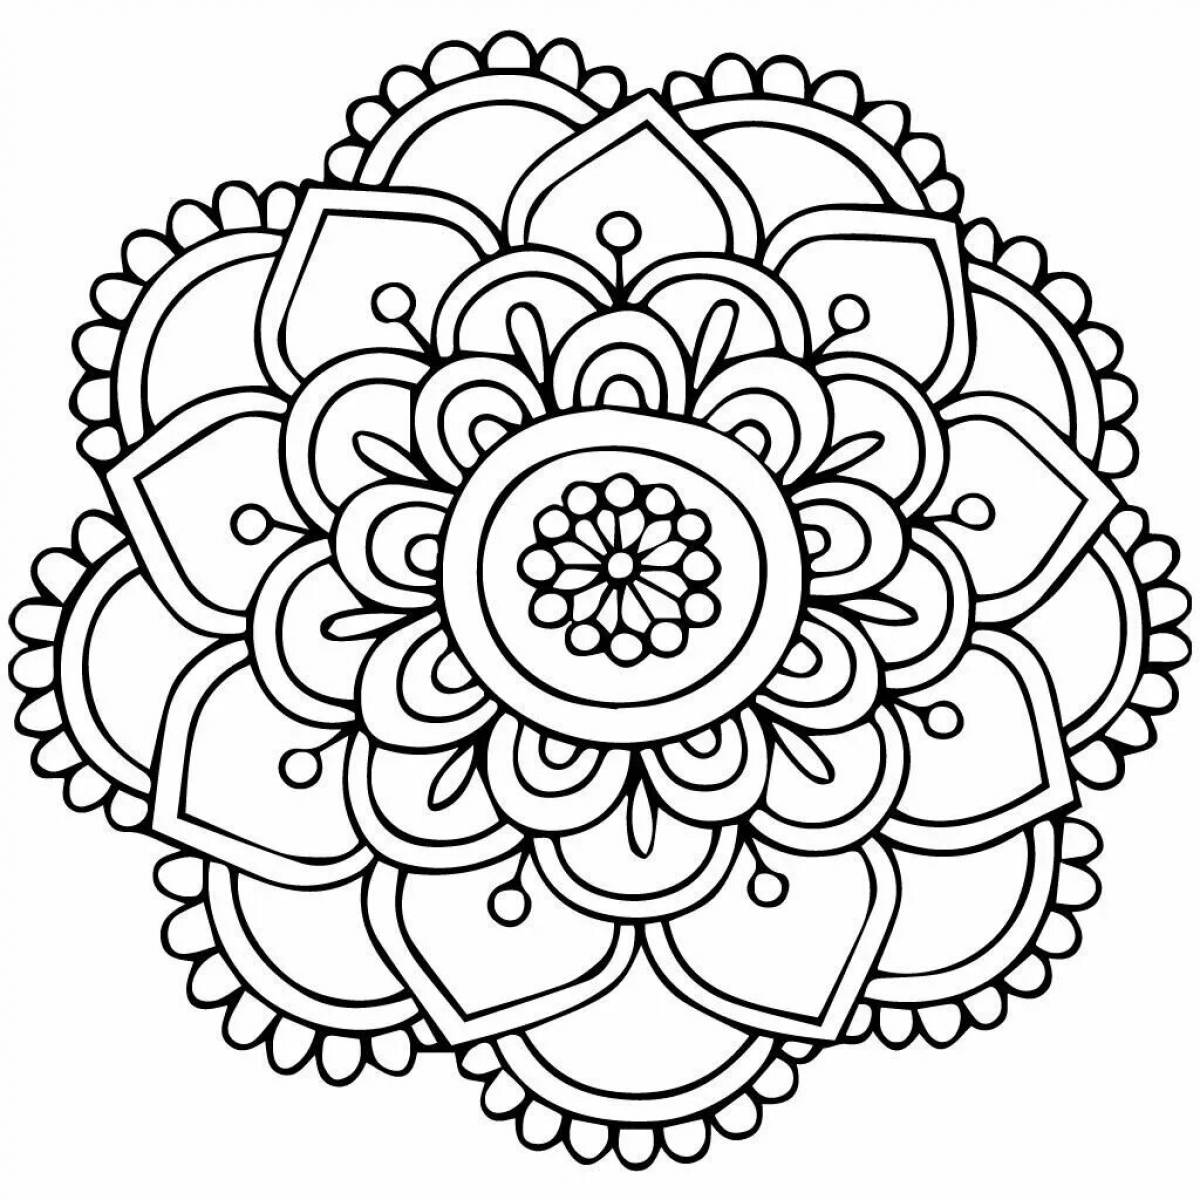 Anti-aging simple anti-stress pencil coloring page